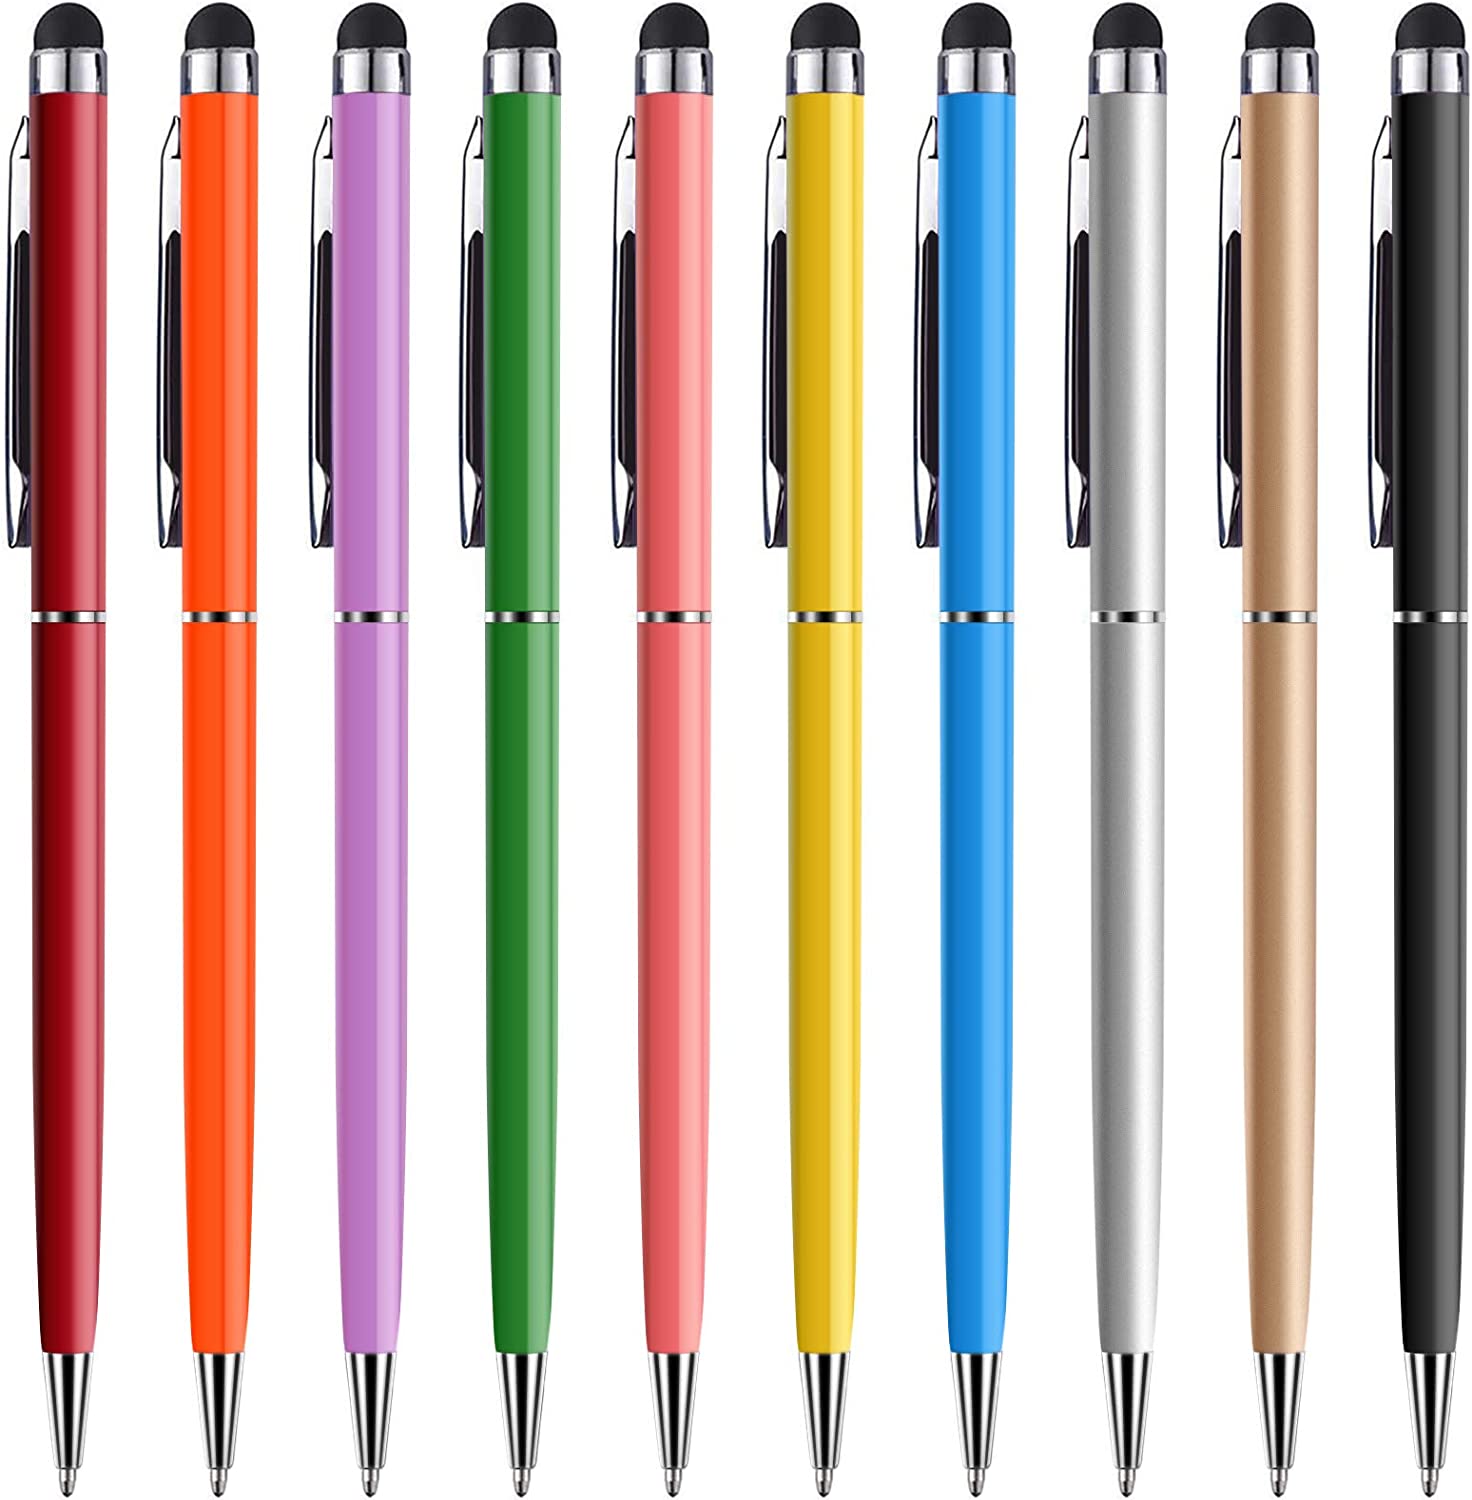 Stylus Pen anngrowy Stylus Pens for Touch Screens [...]